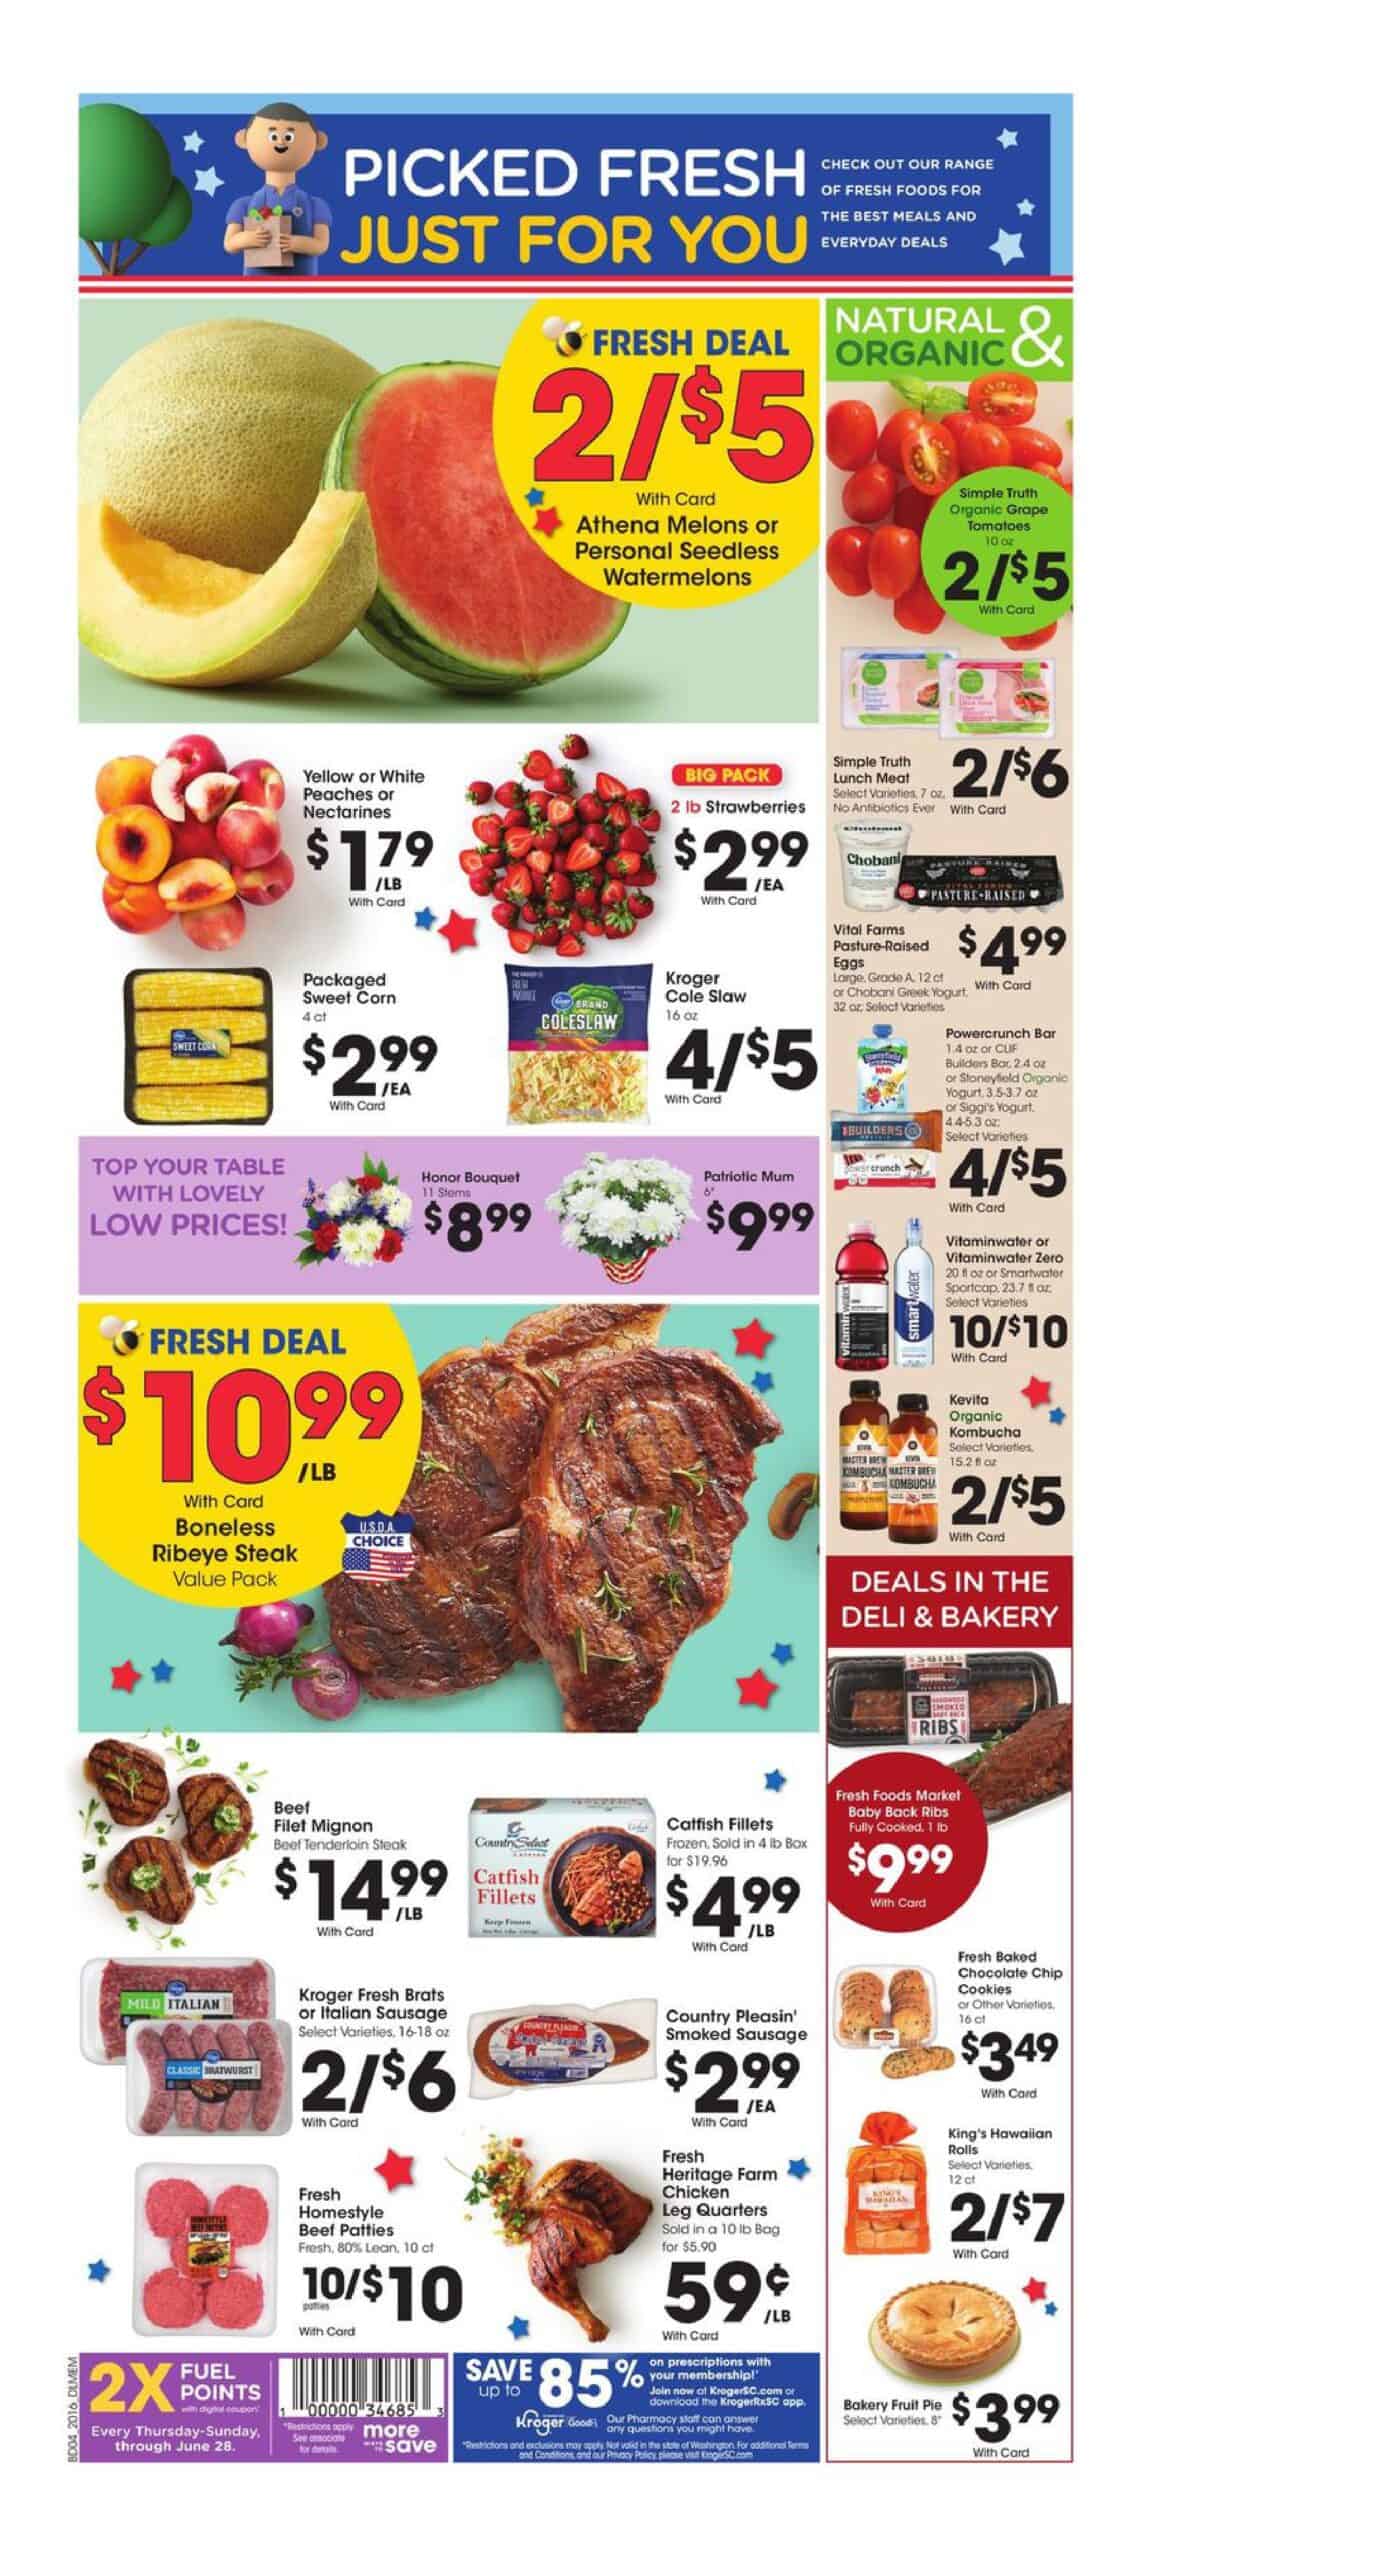 Kroger Weekly Ad Scan for 05/20/20 – 05/26/2020